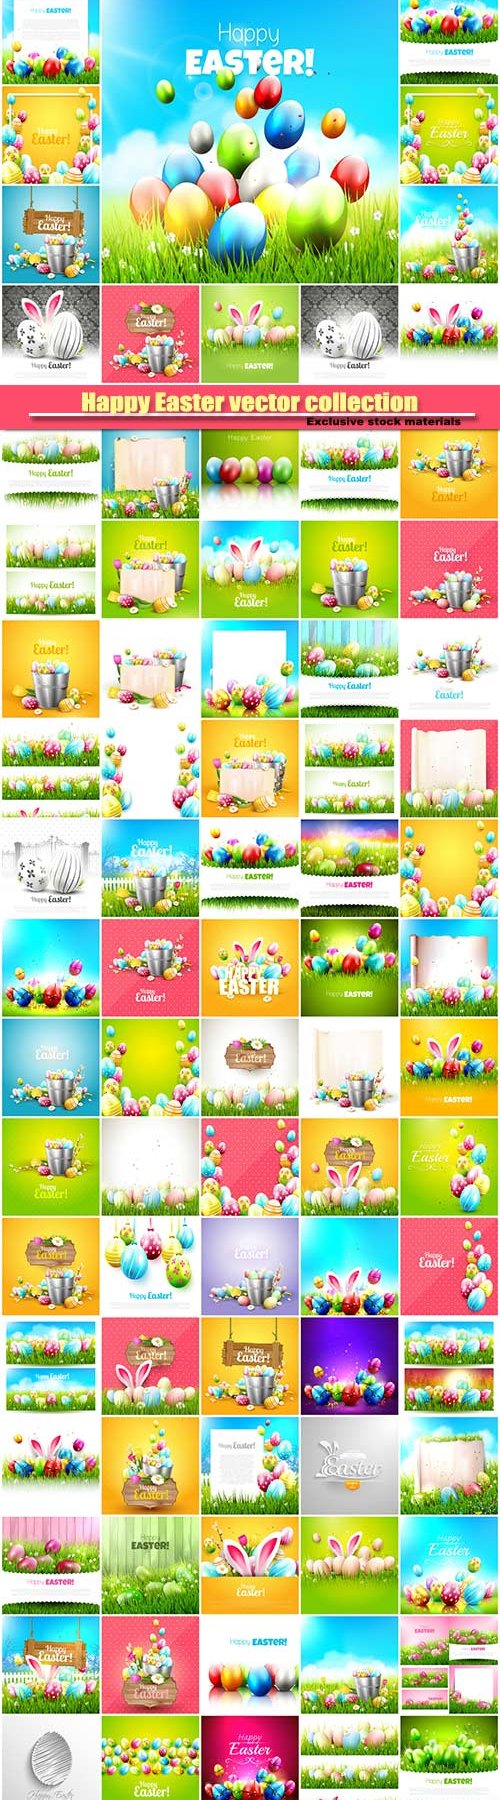 Happy Easter vector collection